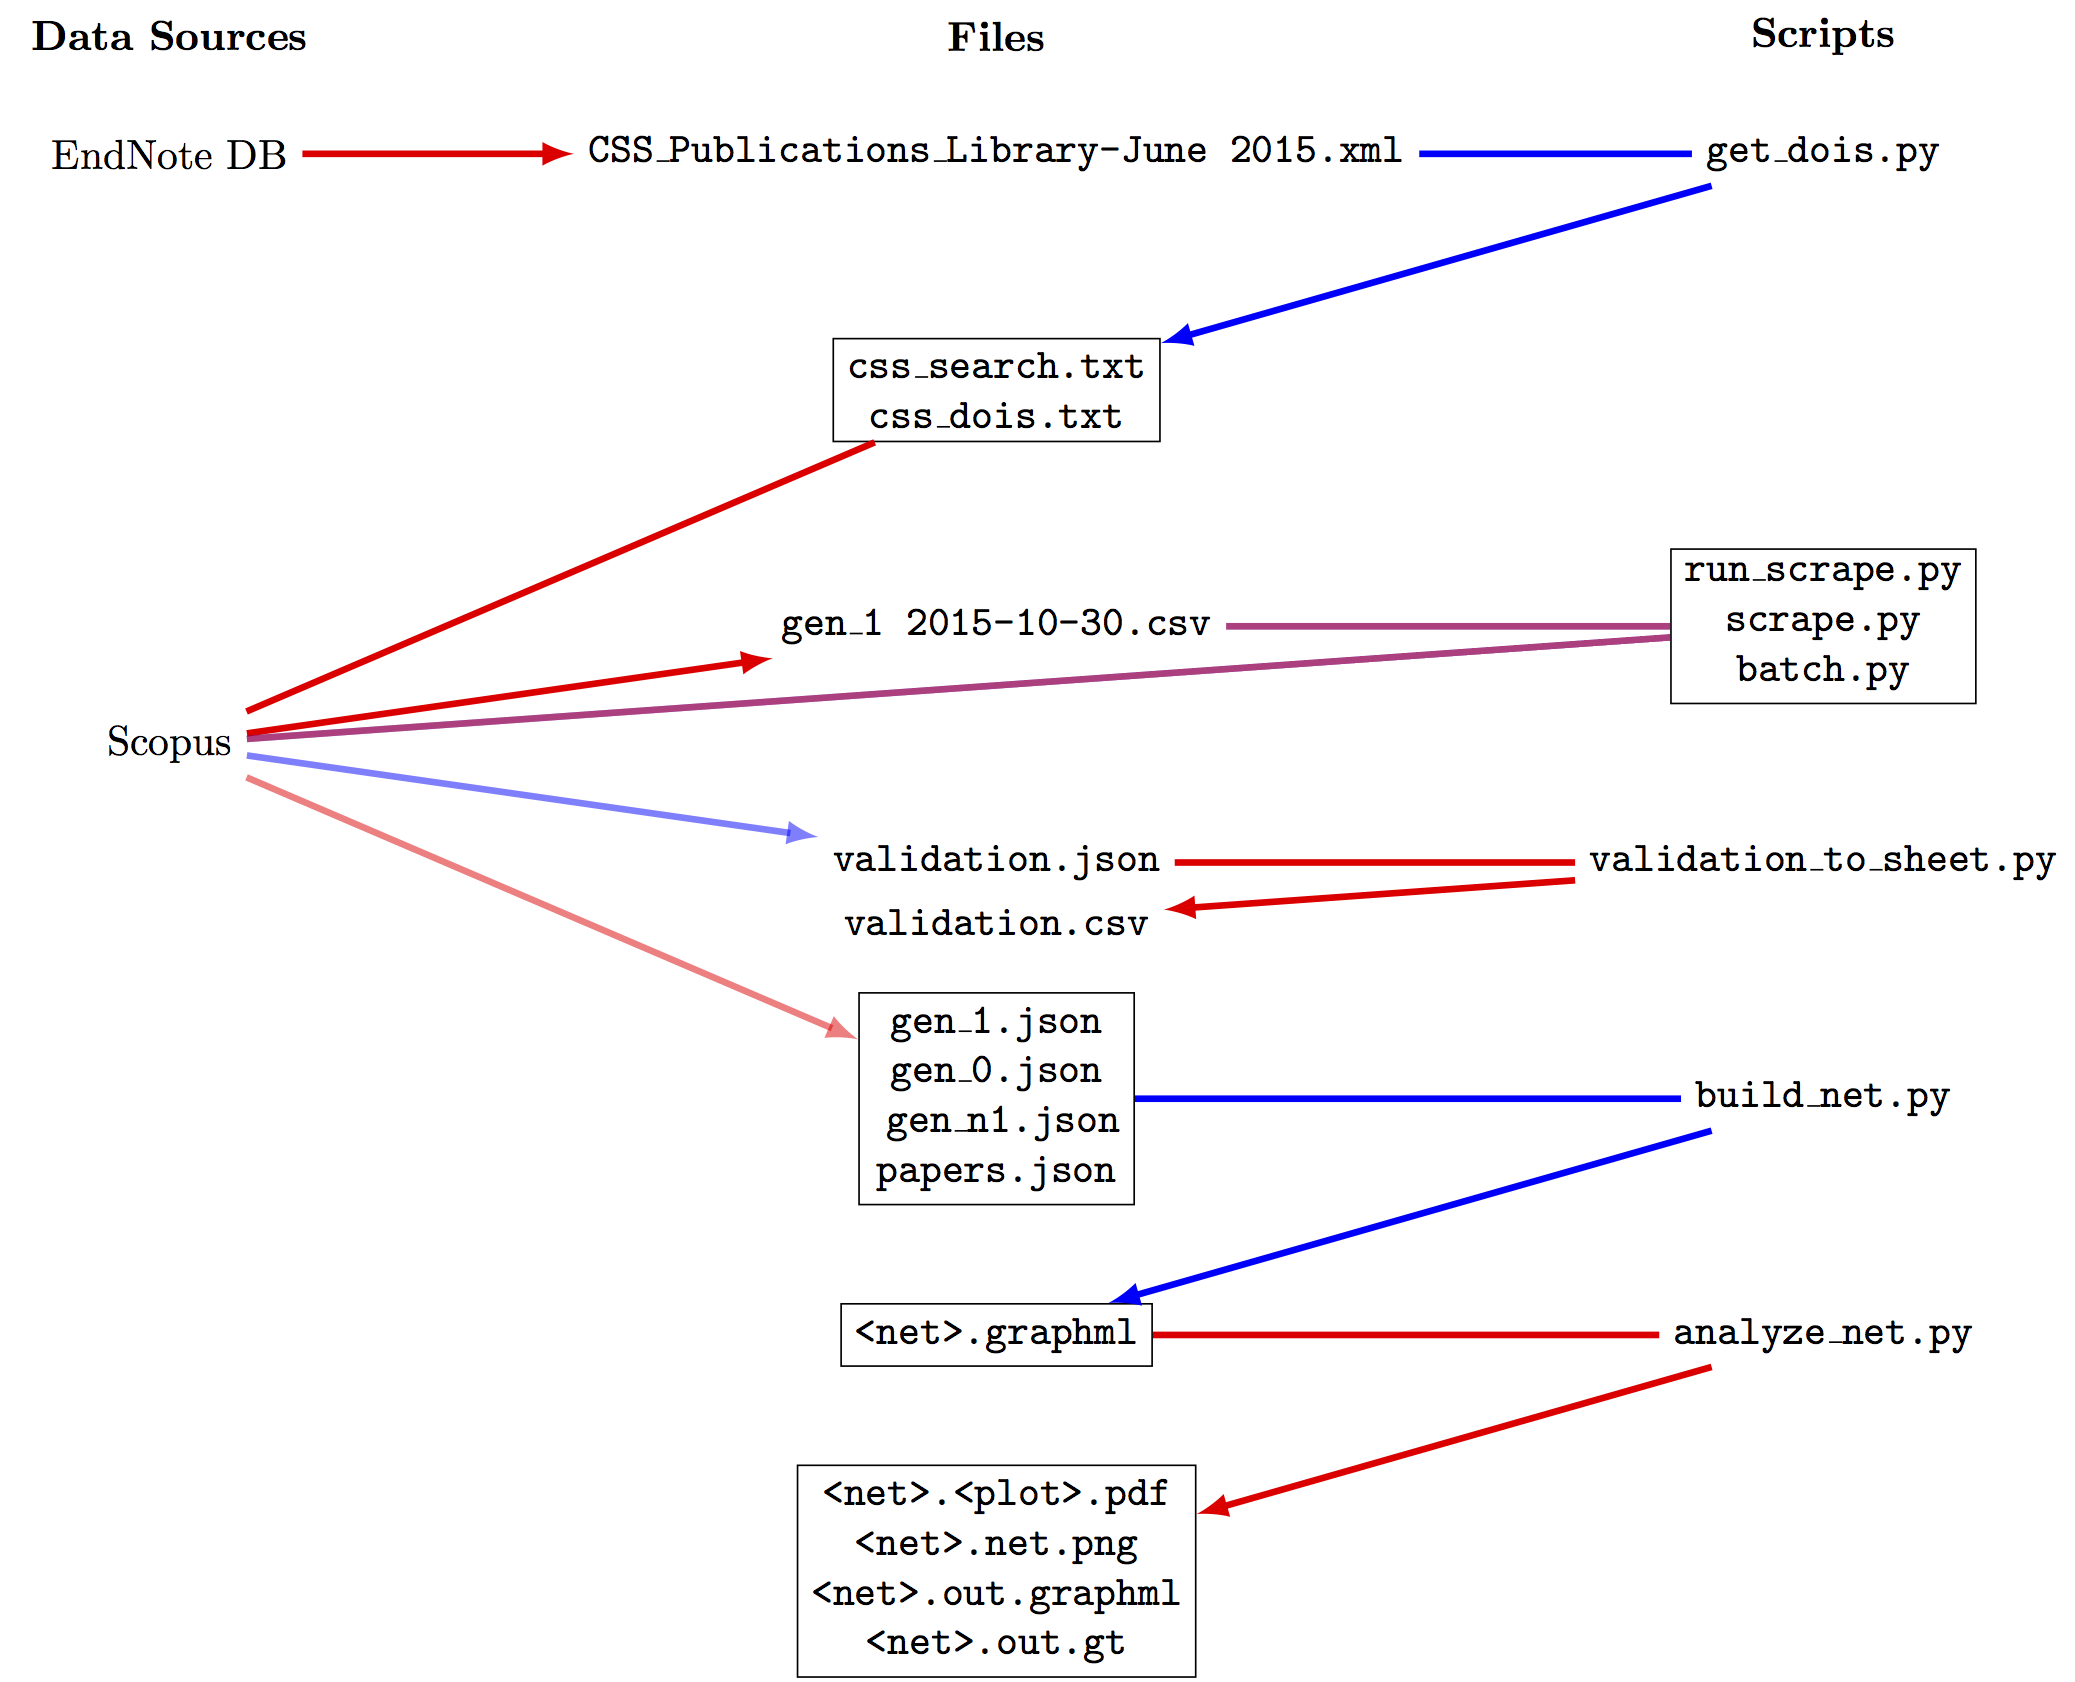 Flow diagram for data sources, files, and scripts